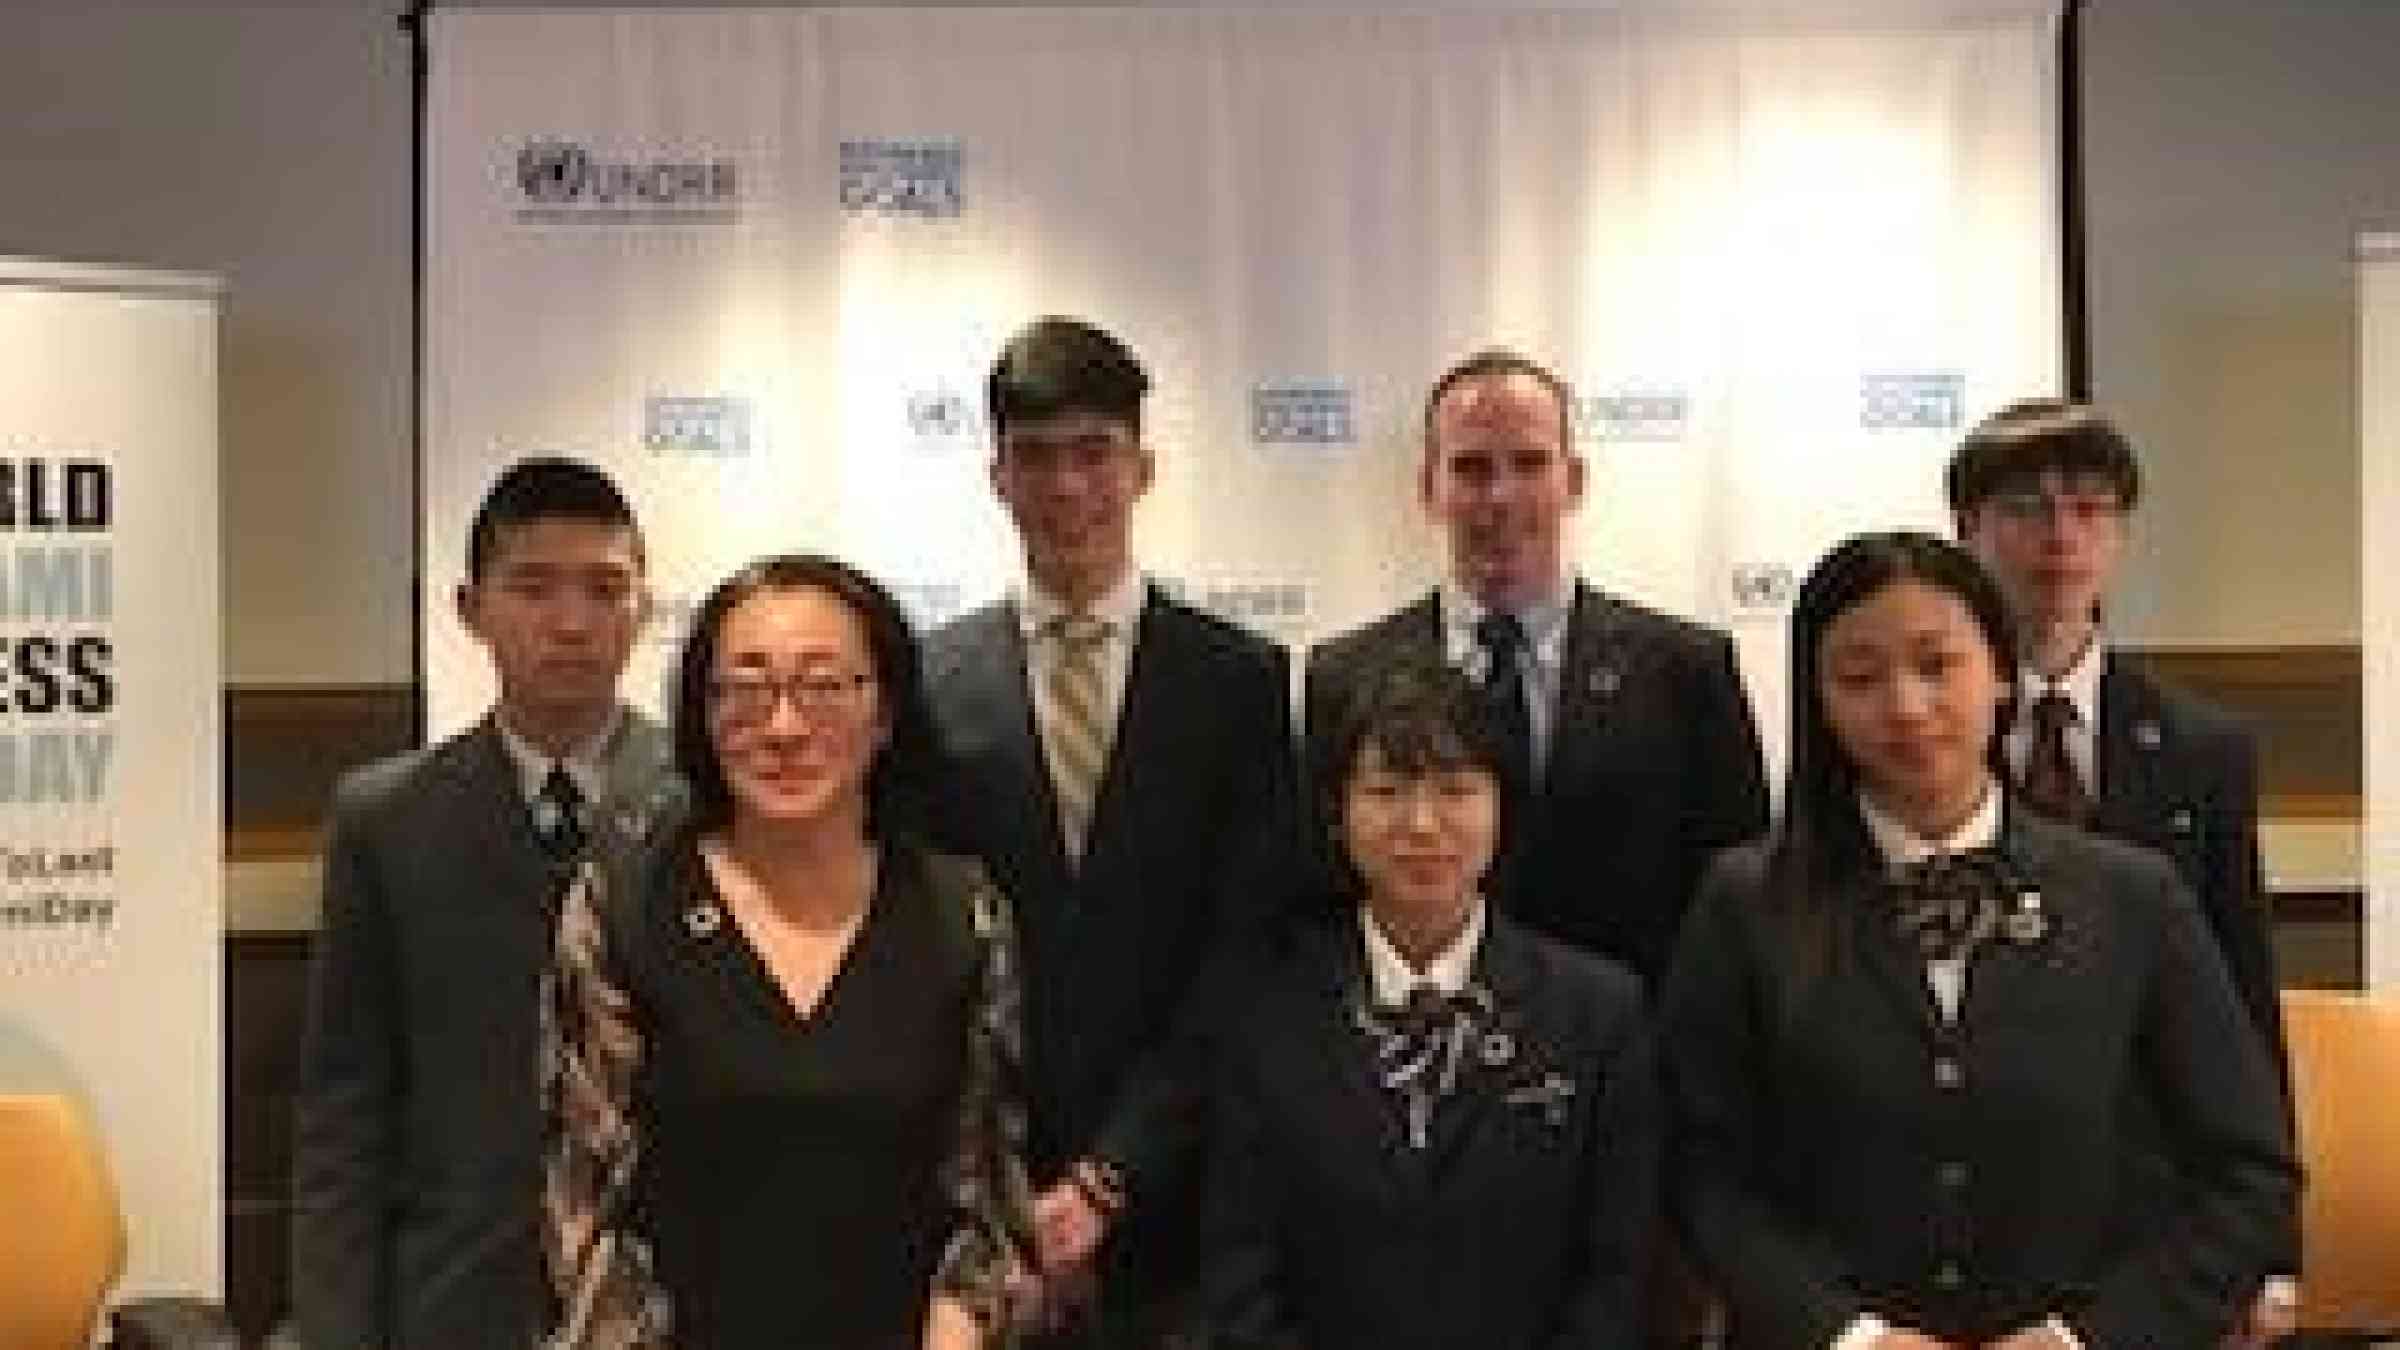 Mami Mizutori with five young representatives from the High School Student Summit and Marc McDonald from the AARP Foundation at the Intergenerational Dialogue.